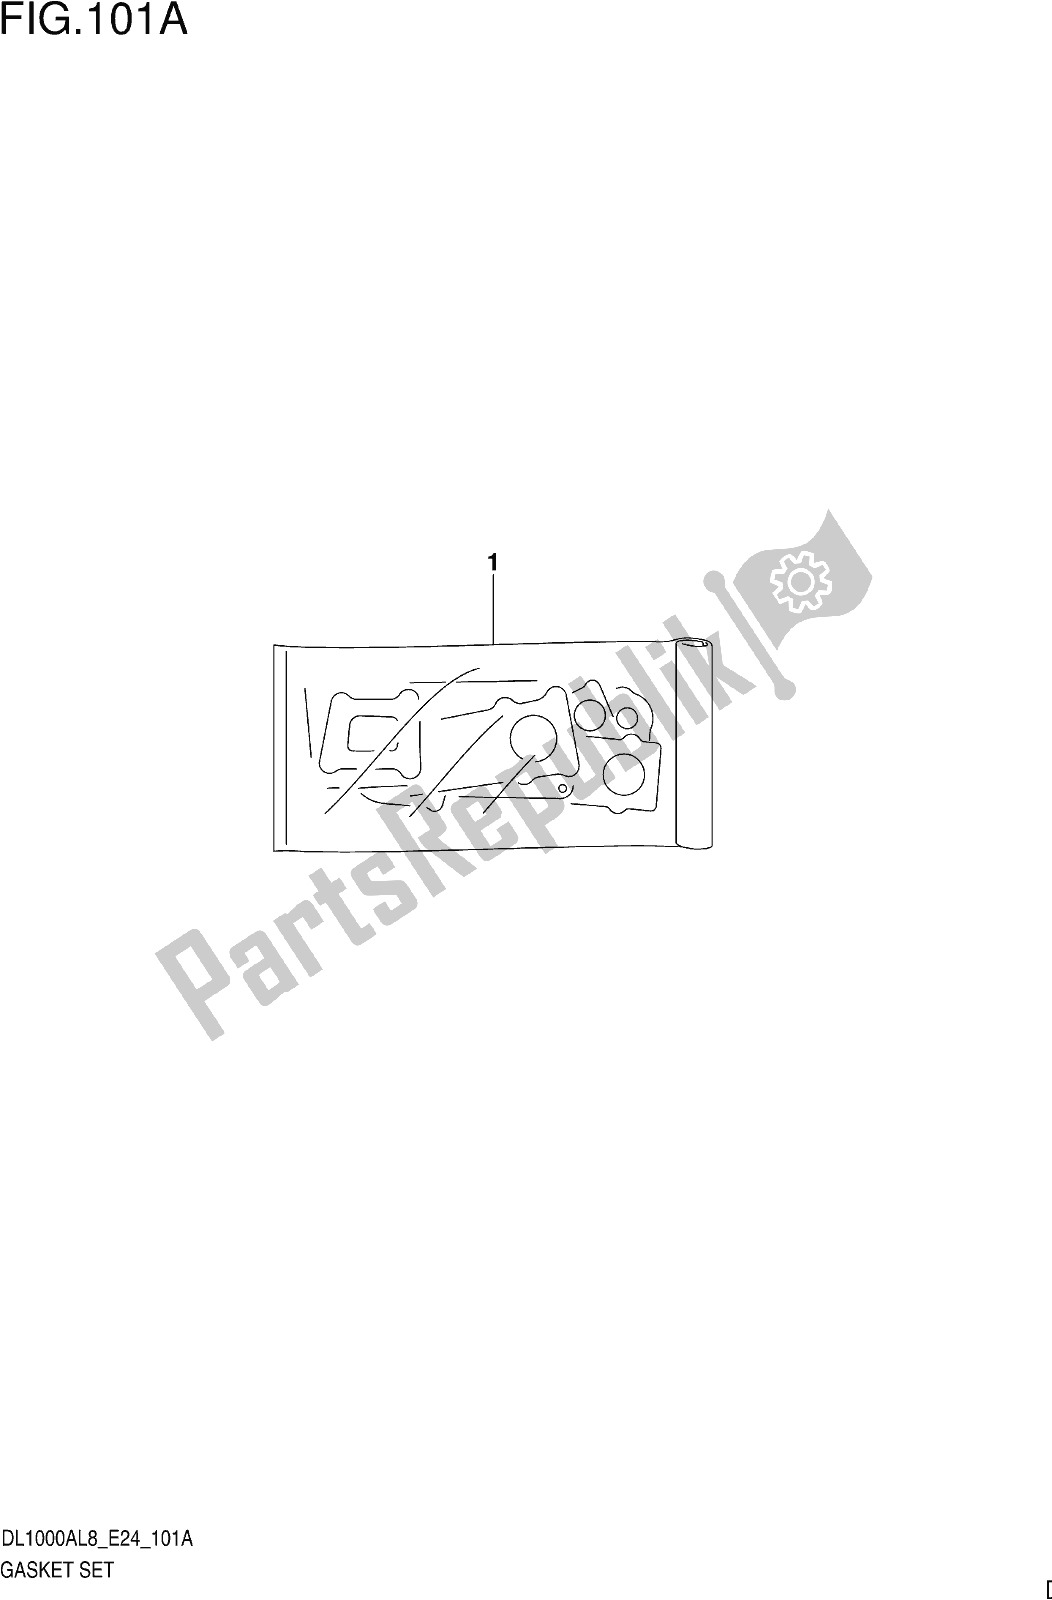 All parts for the Fig. 101a Gasket Set of the Suzuki DL 1000 XA 2018